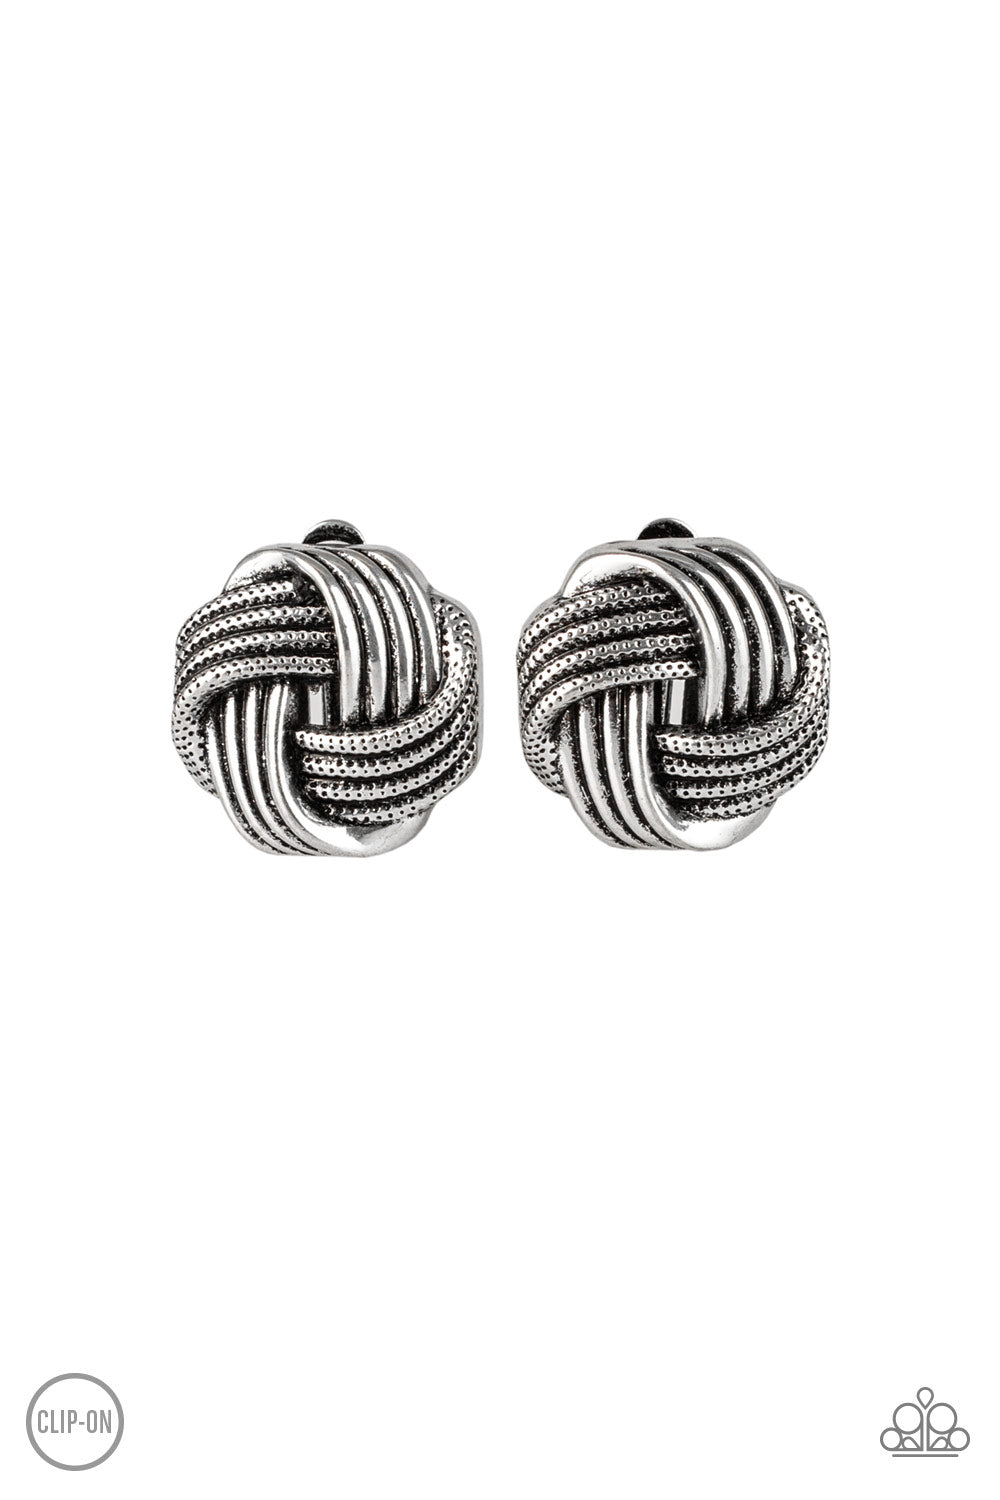 Paparazzi Accessories  - Noticeably Knotted #E98 Bin 20 - Silver Earring